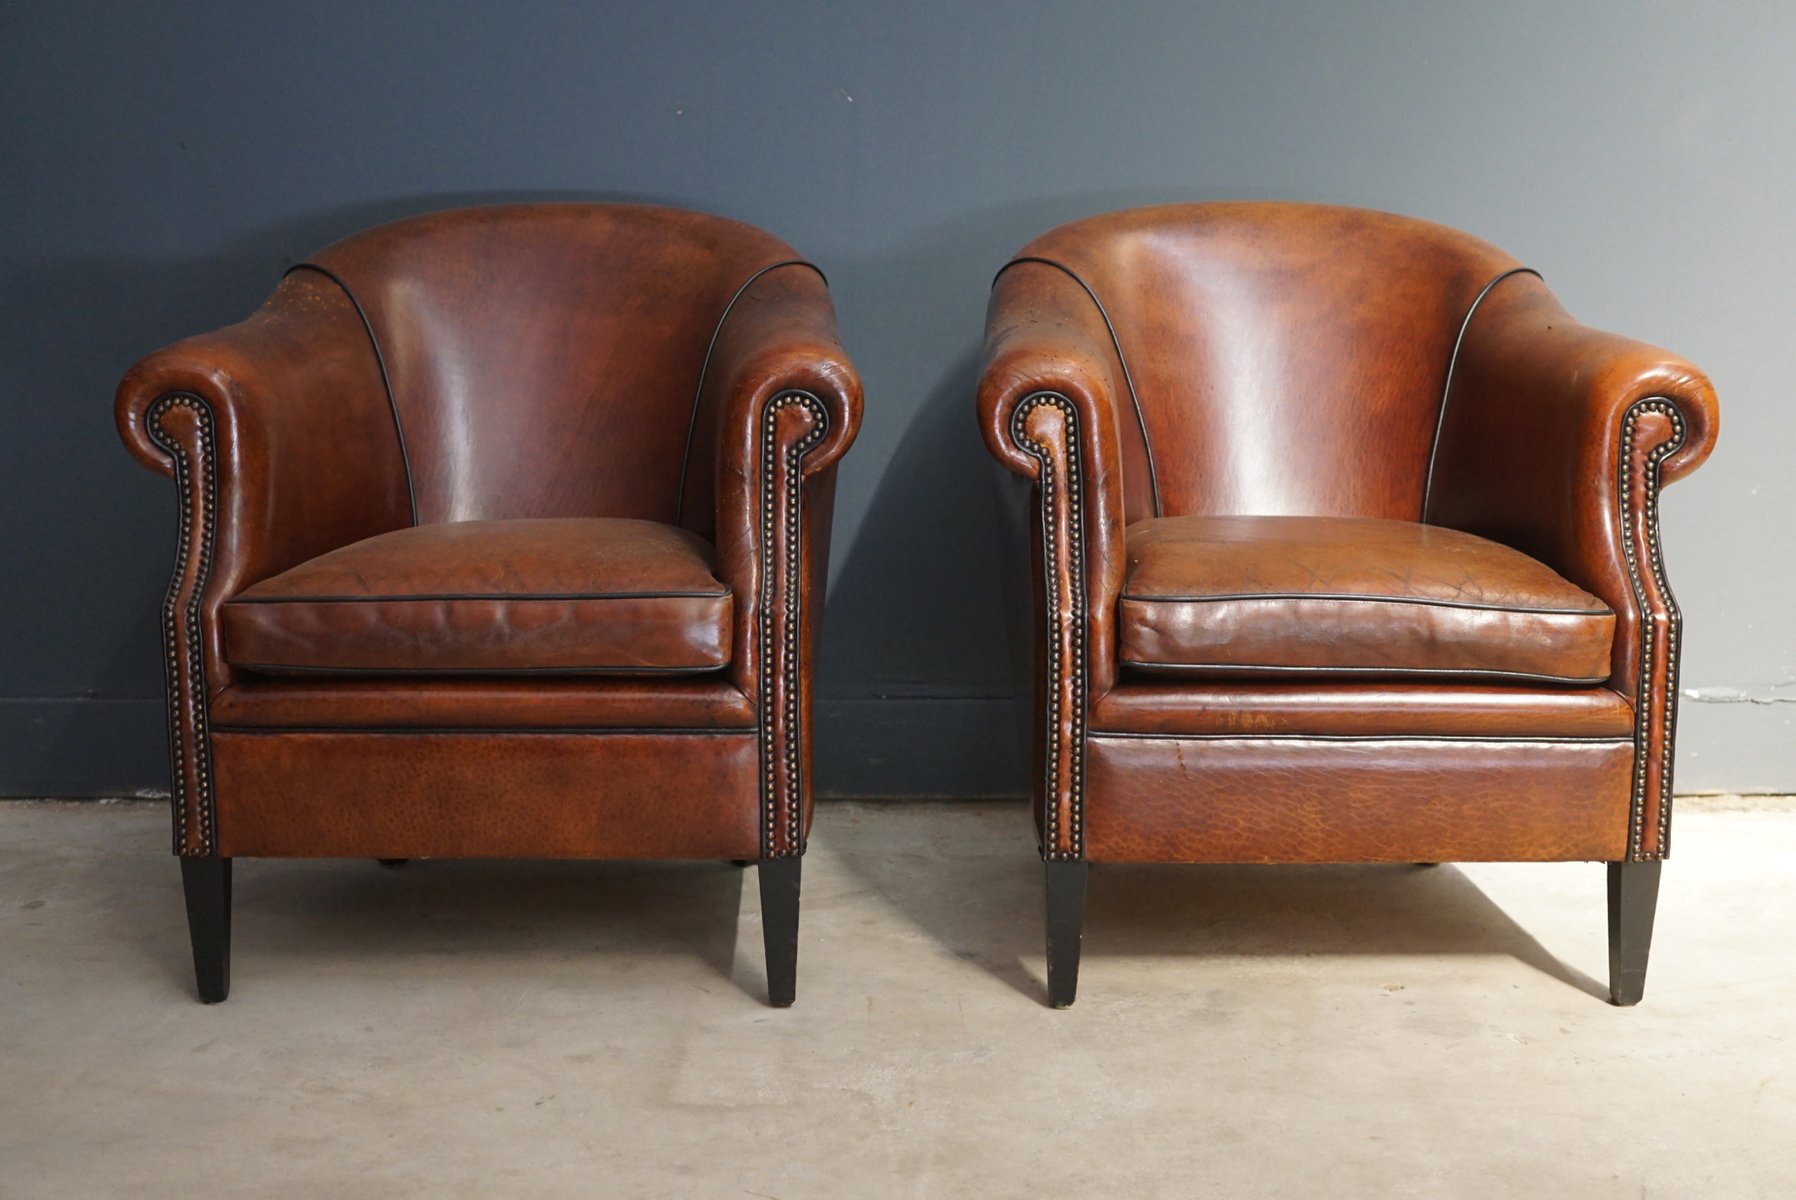 Vintage Cognac Leather Club Chairs, Set of 2 for sale at Pamono